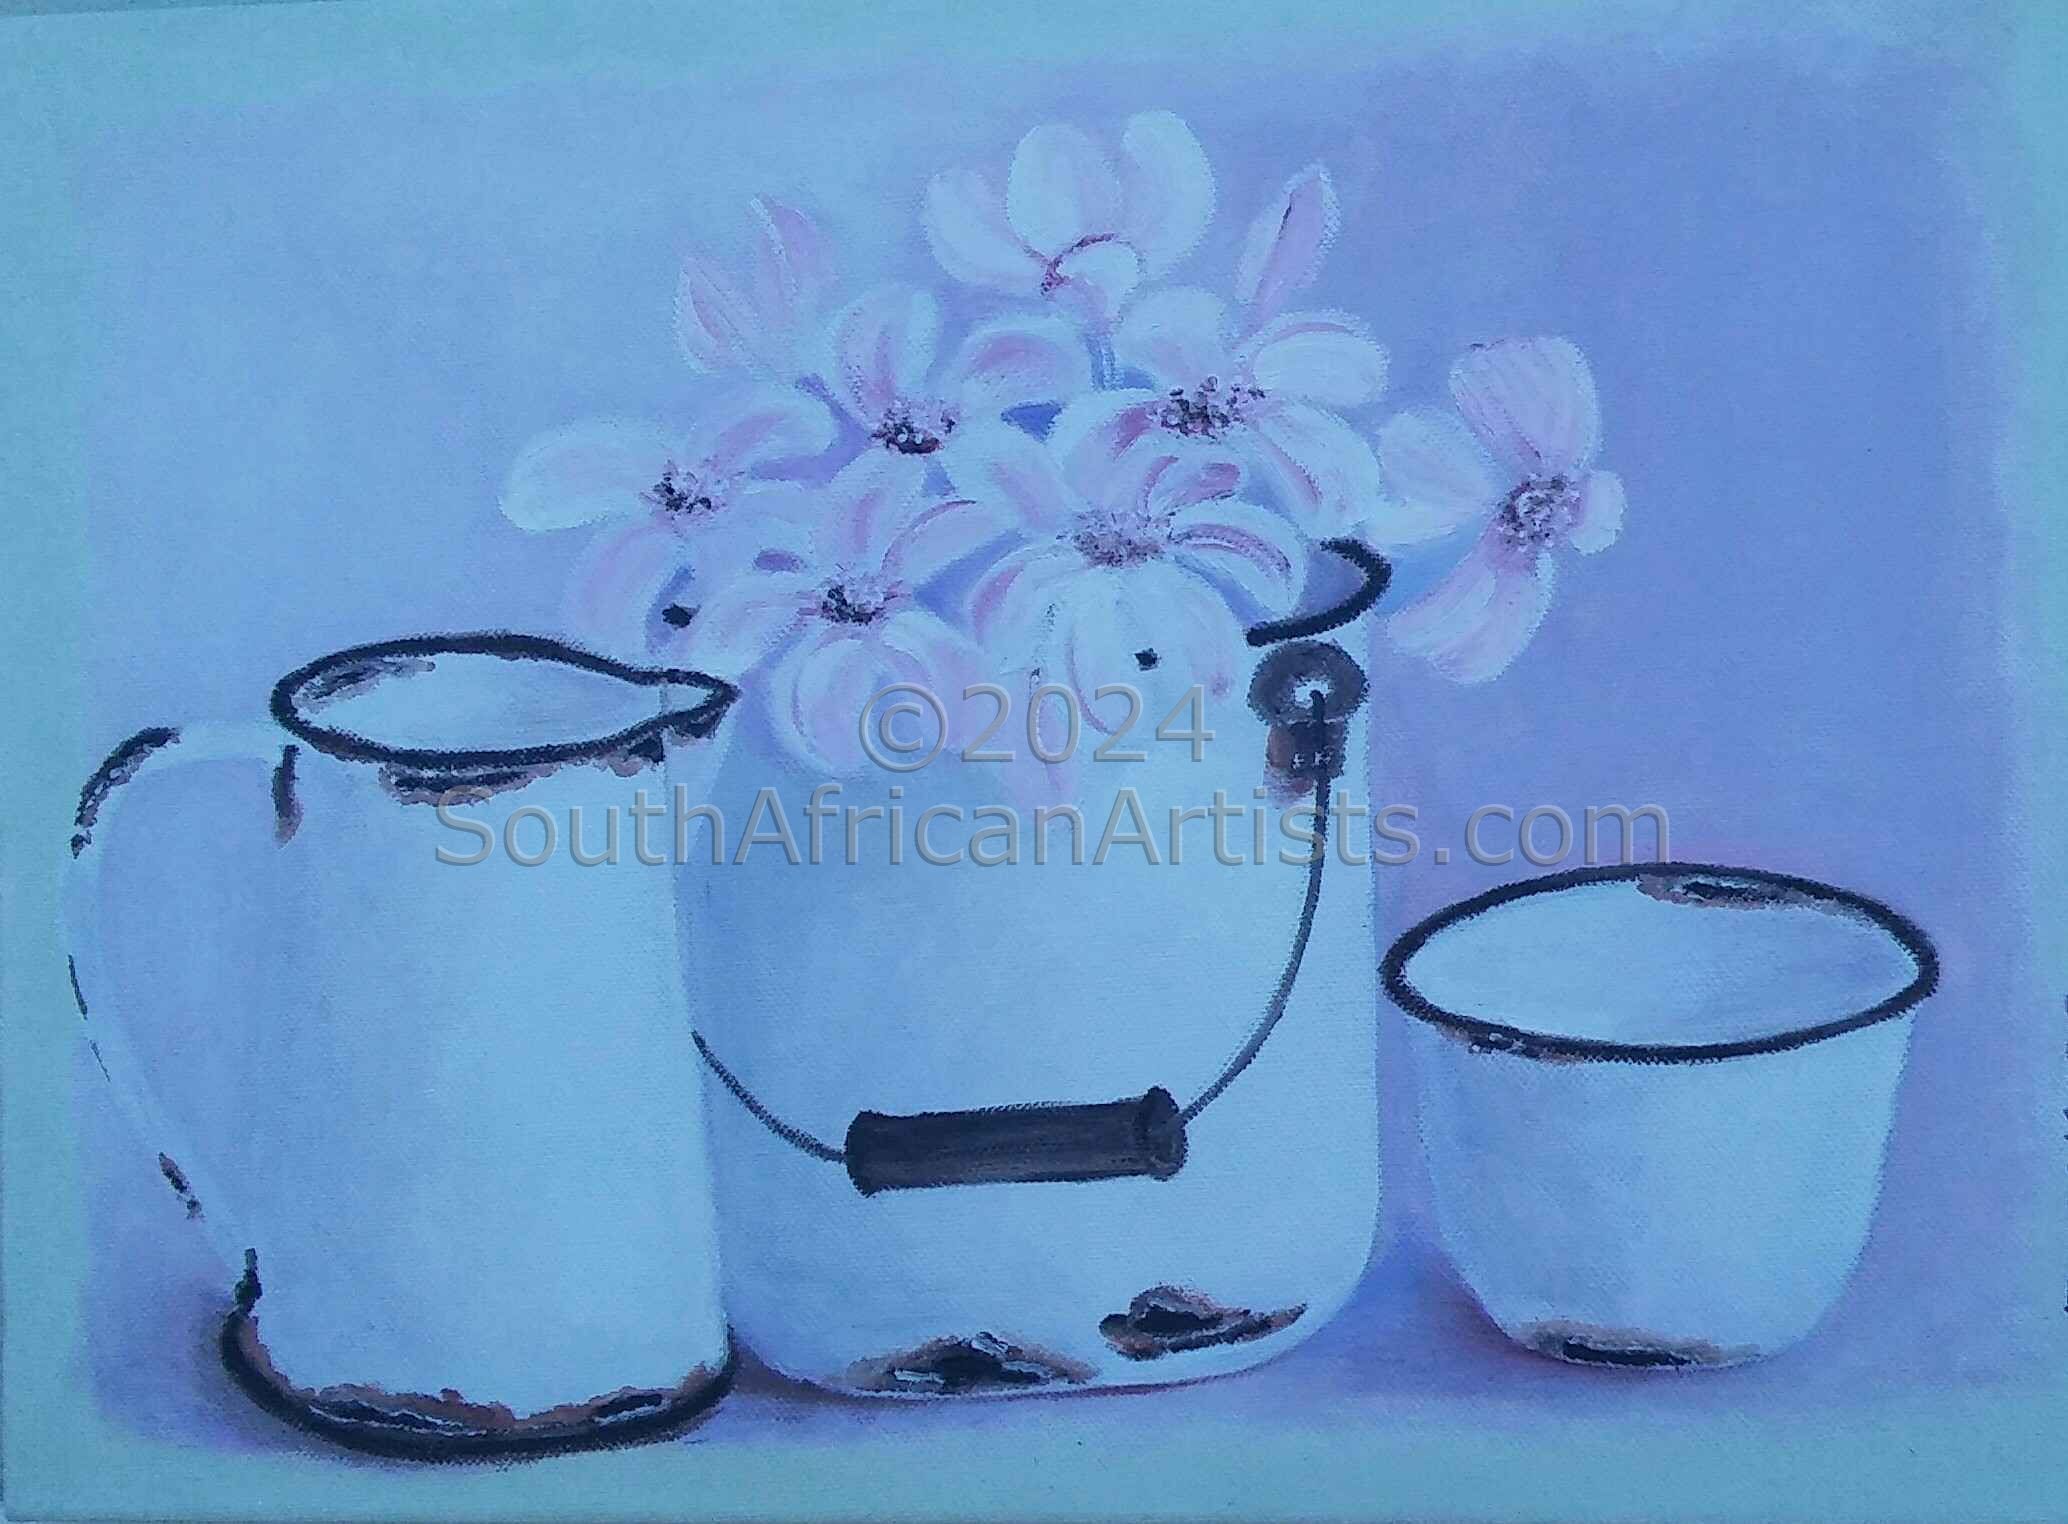 mixed enamel articles with flowers (2)